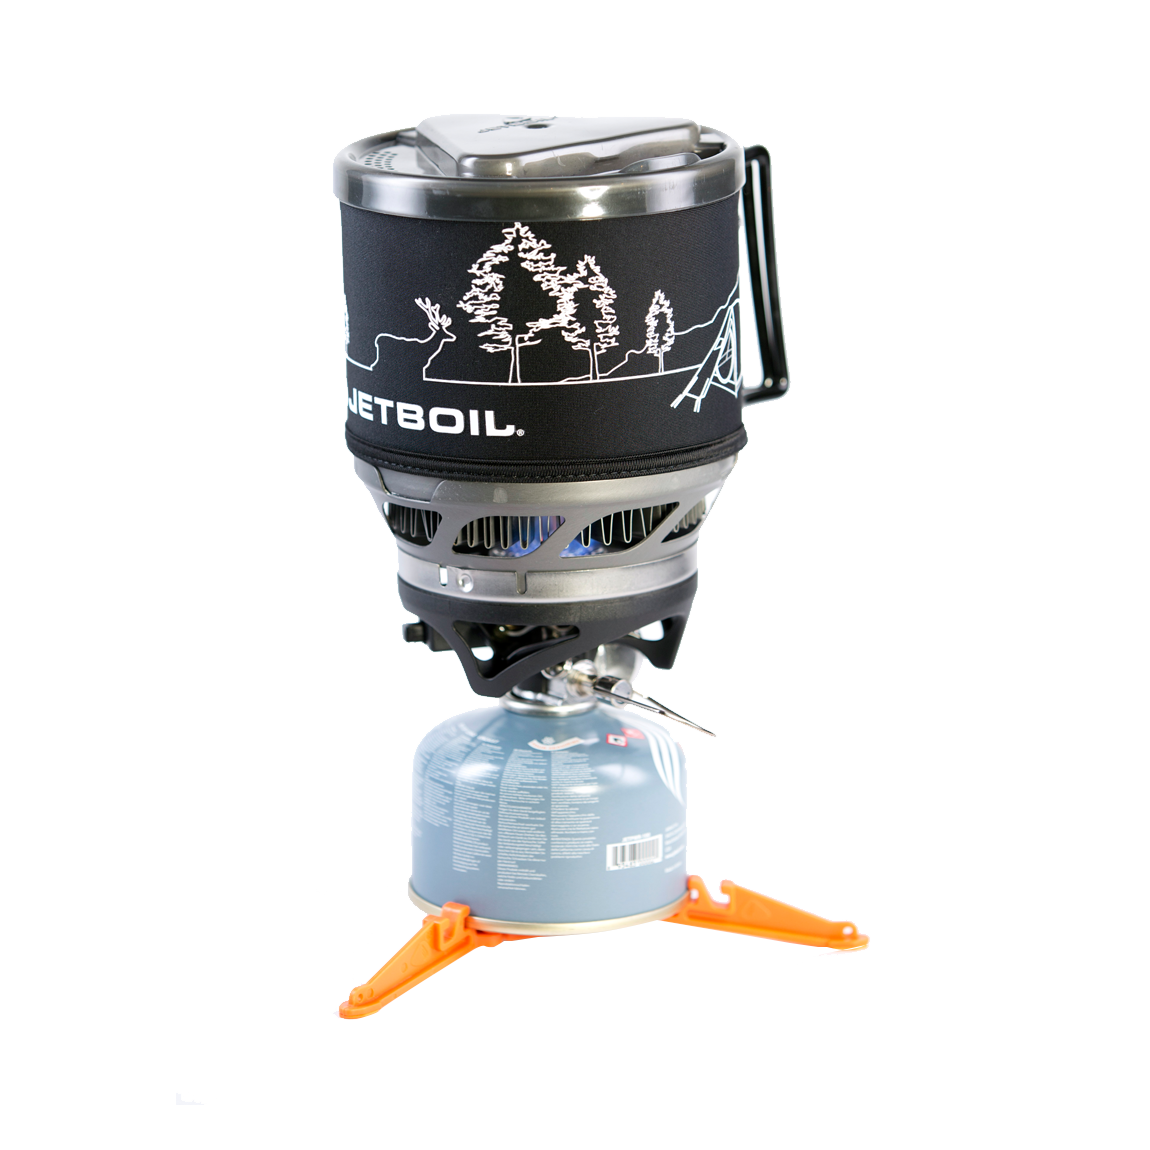 JETBOIL MINIMO PERSONAL COOKING SYSTEM - Southern Wild - 1